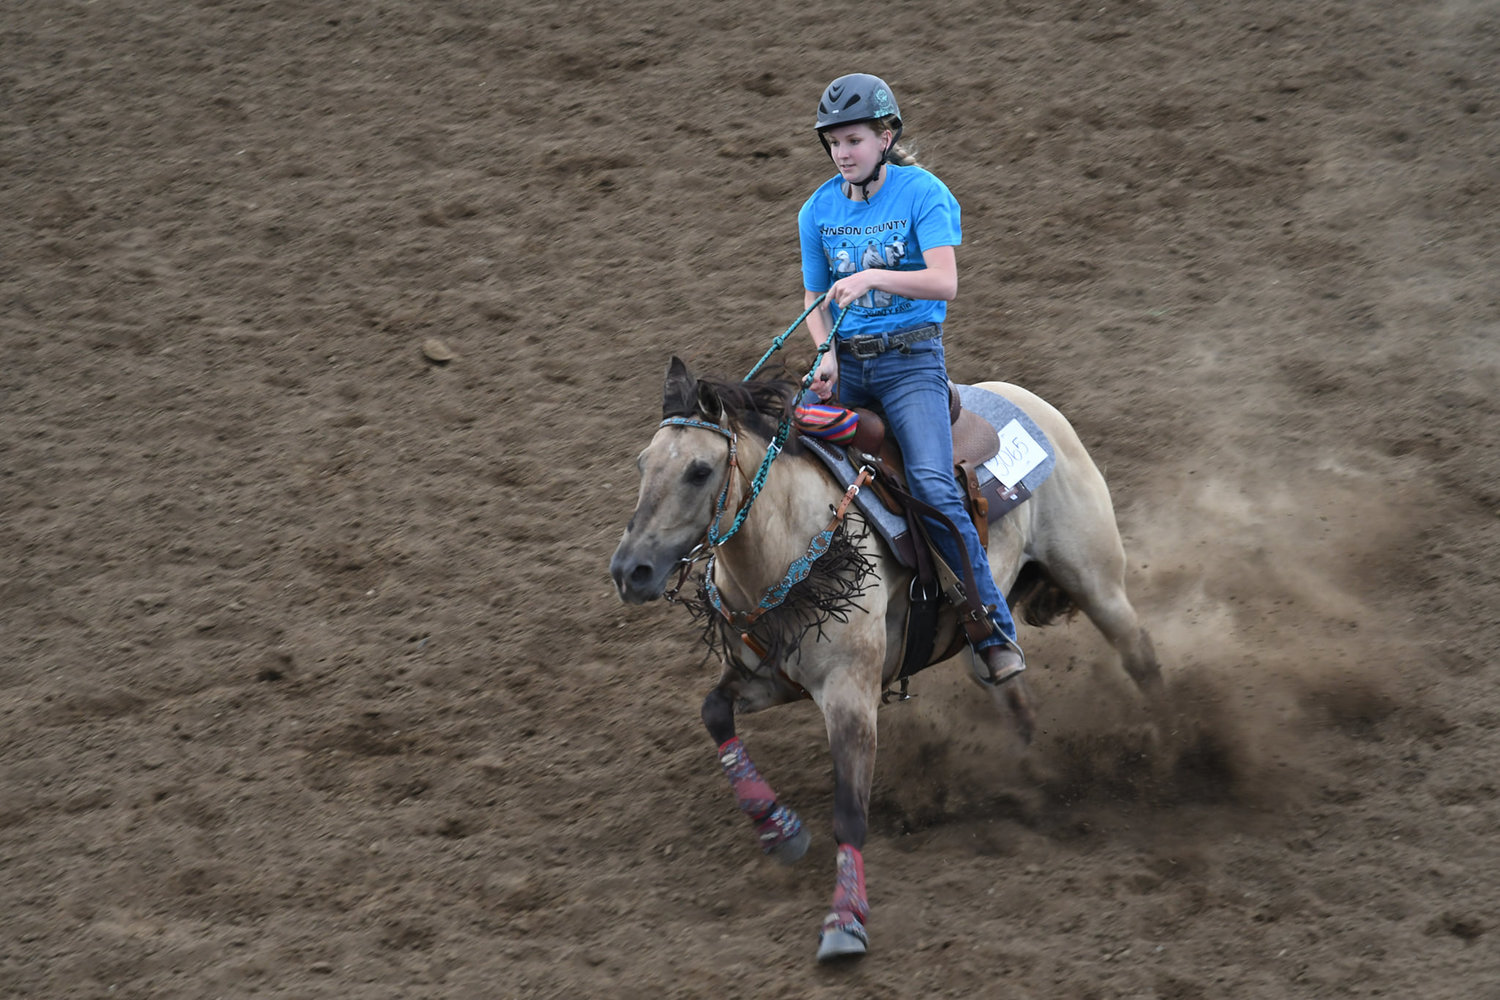 Cydney Larson of the Chilhowee Indians 4-H Club hits the brakes as she finishes a run in Barrel Racing.